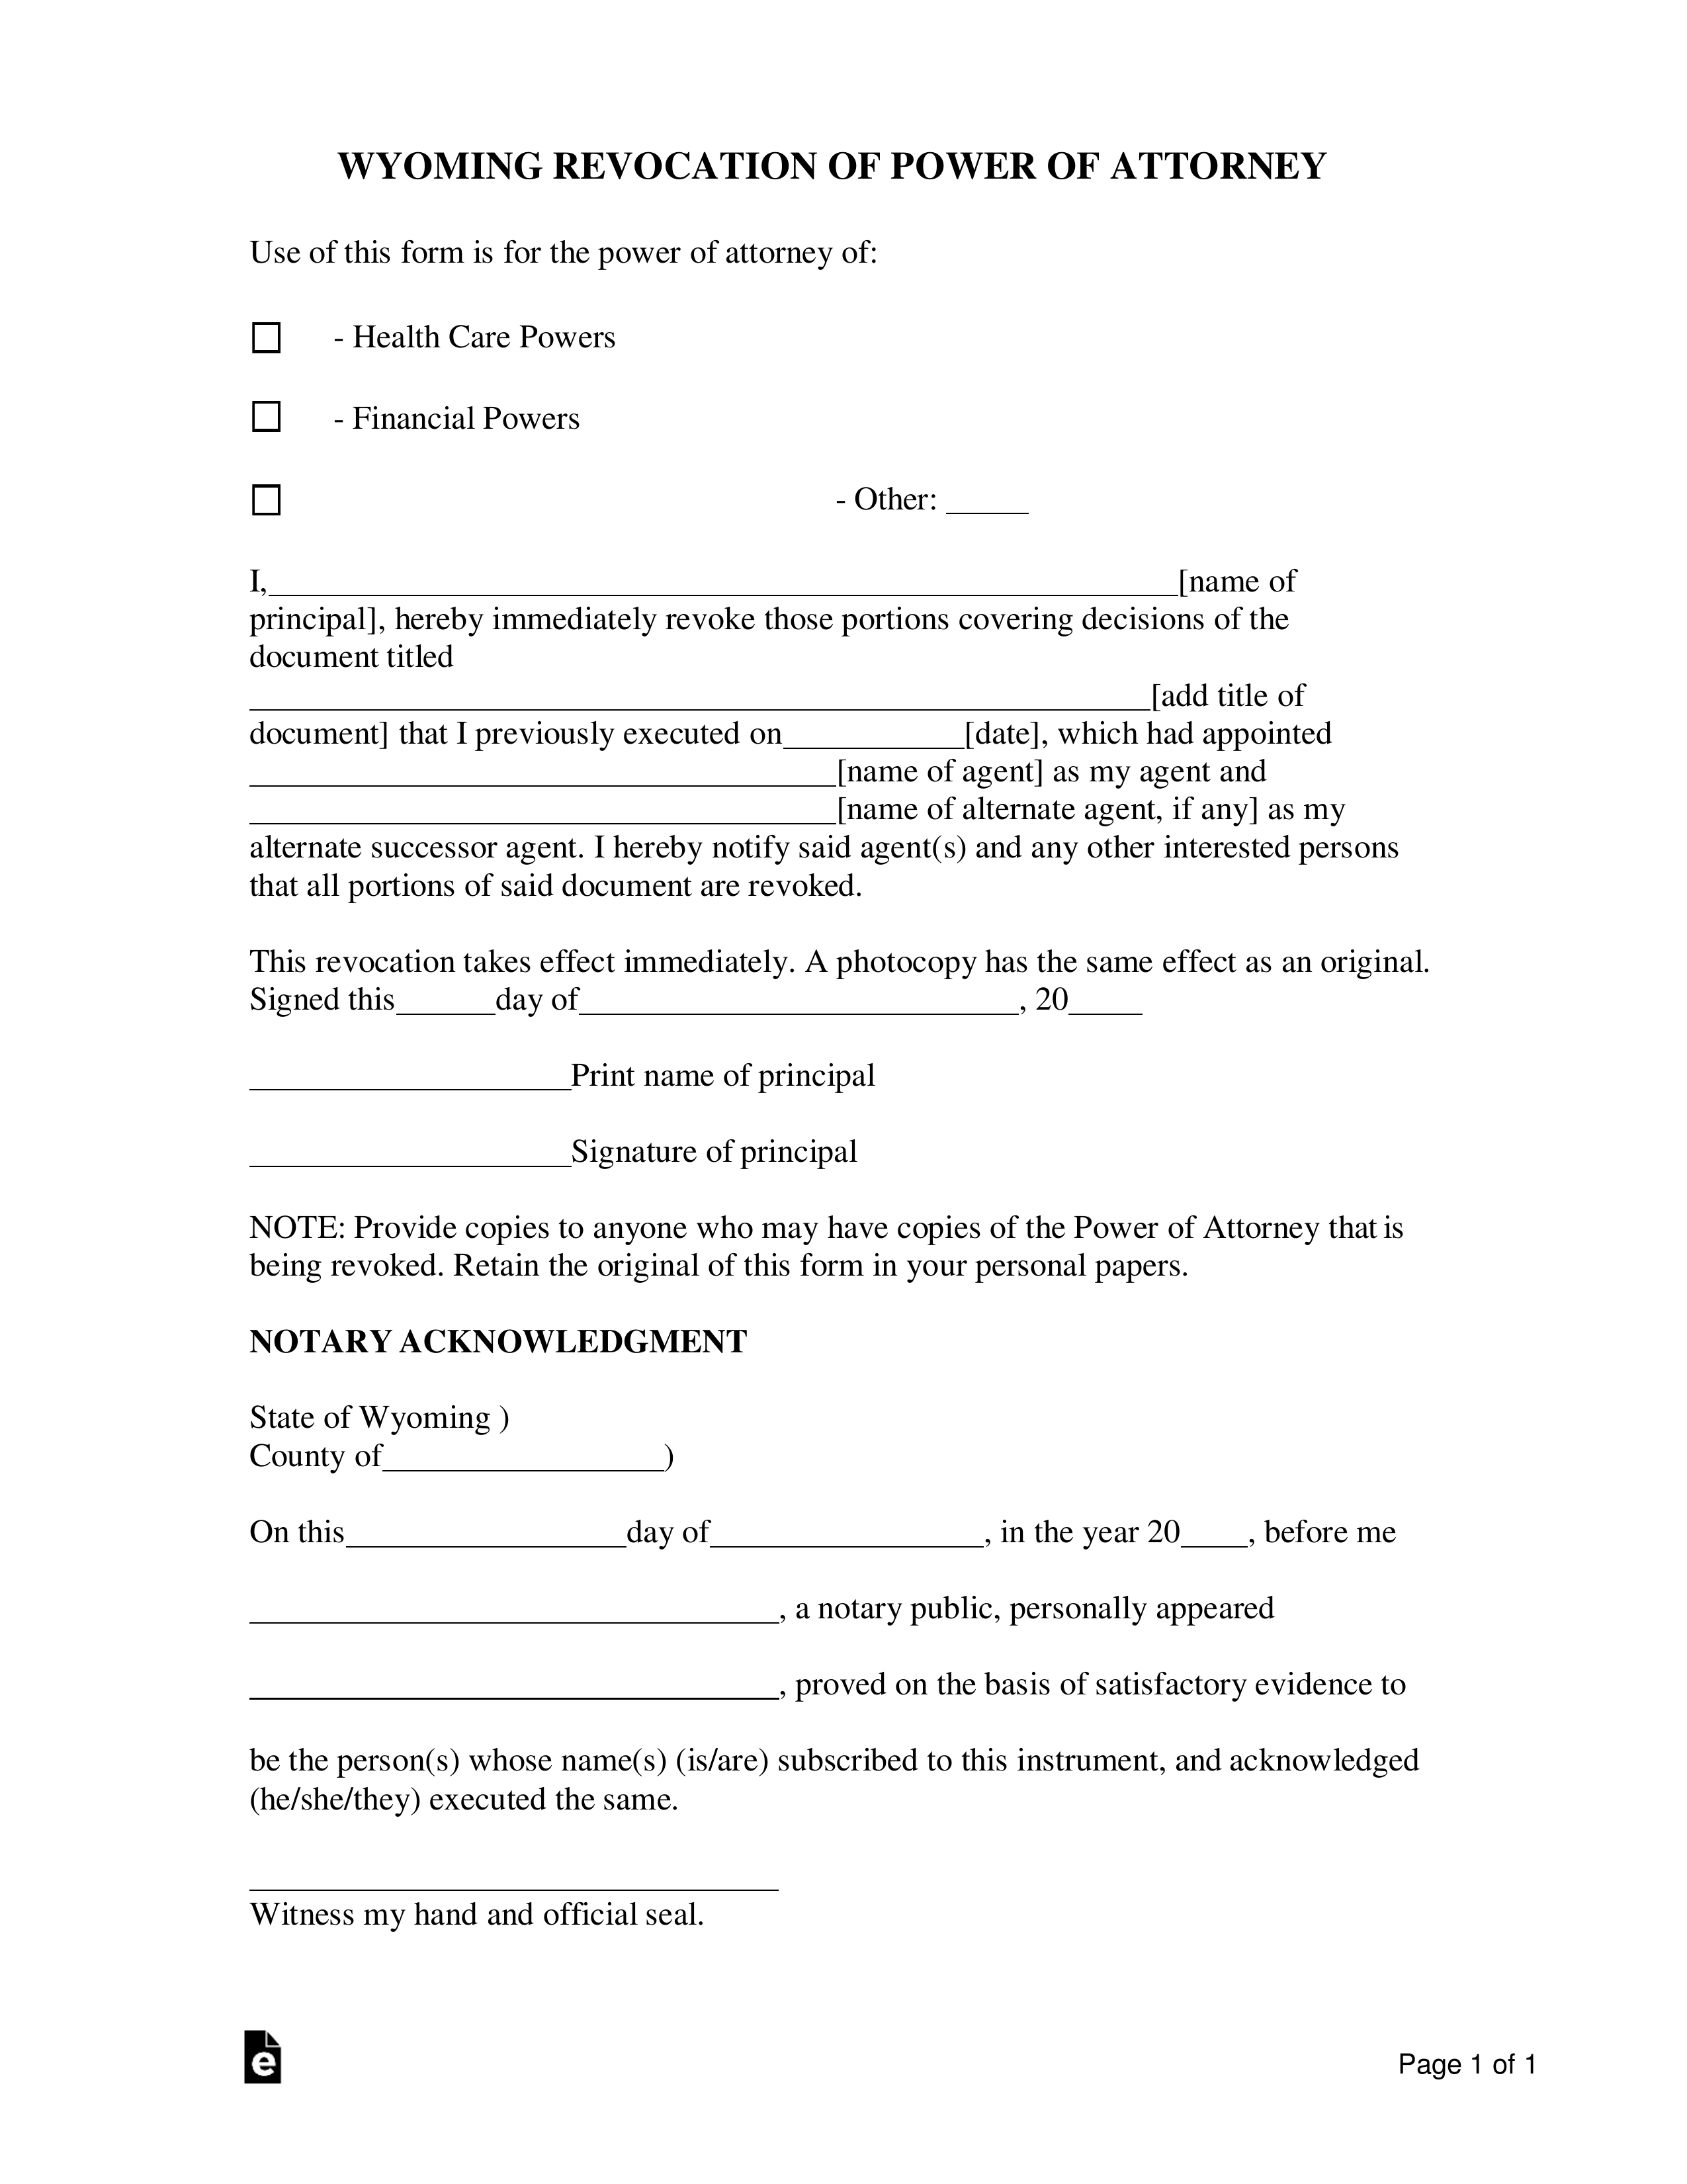 Wyoming Revocation of Power of Attorney Form